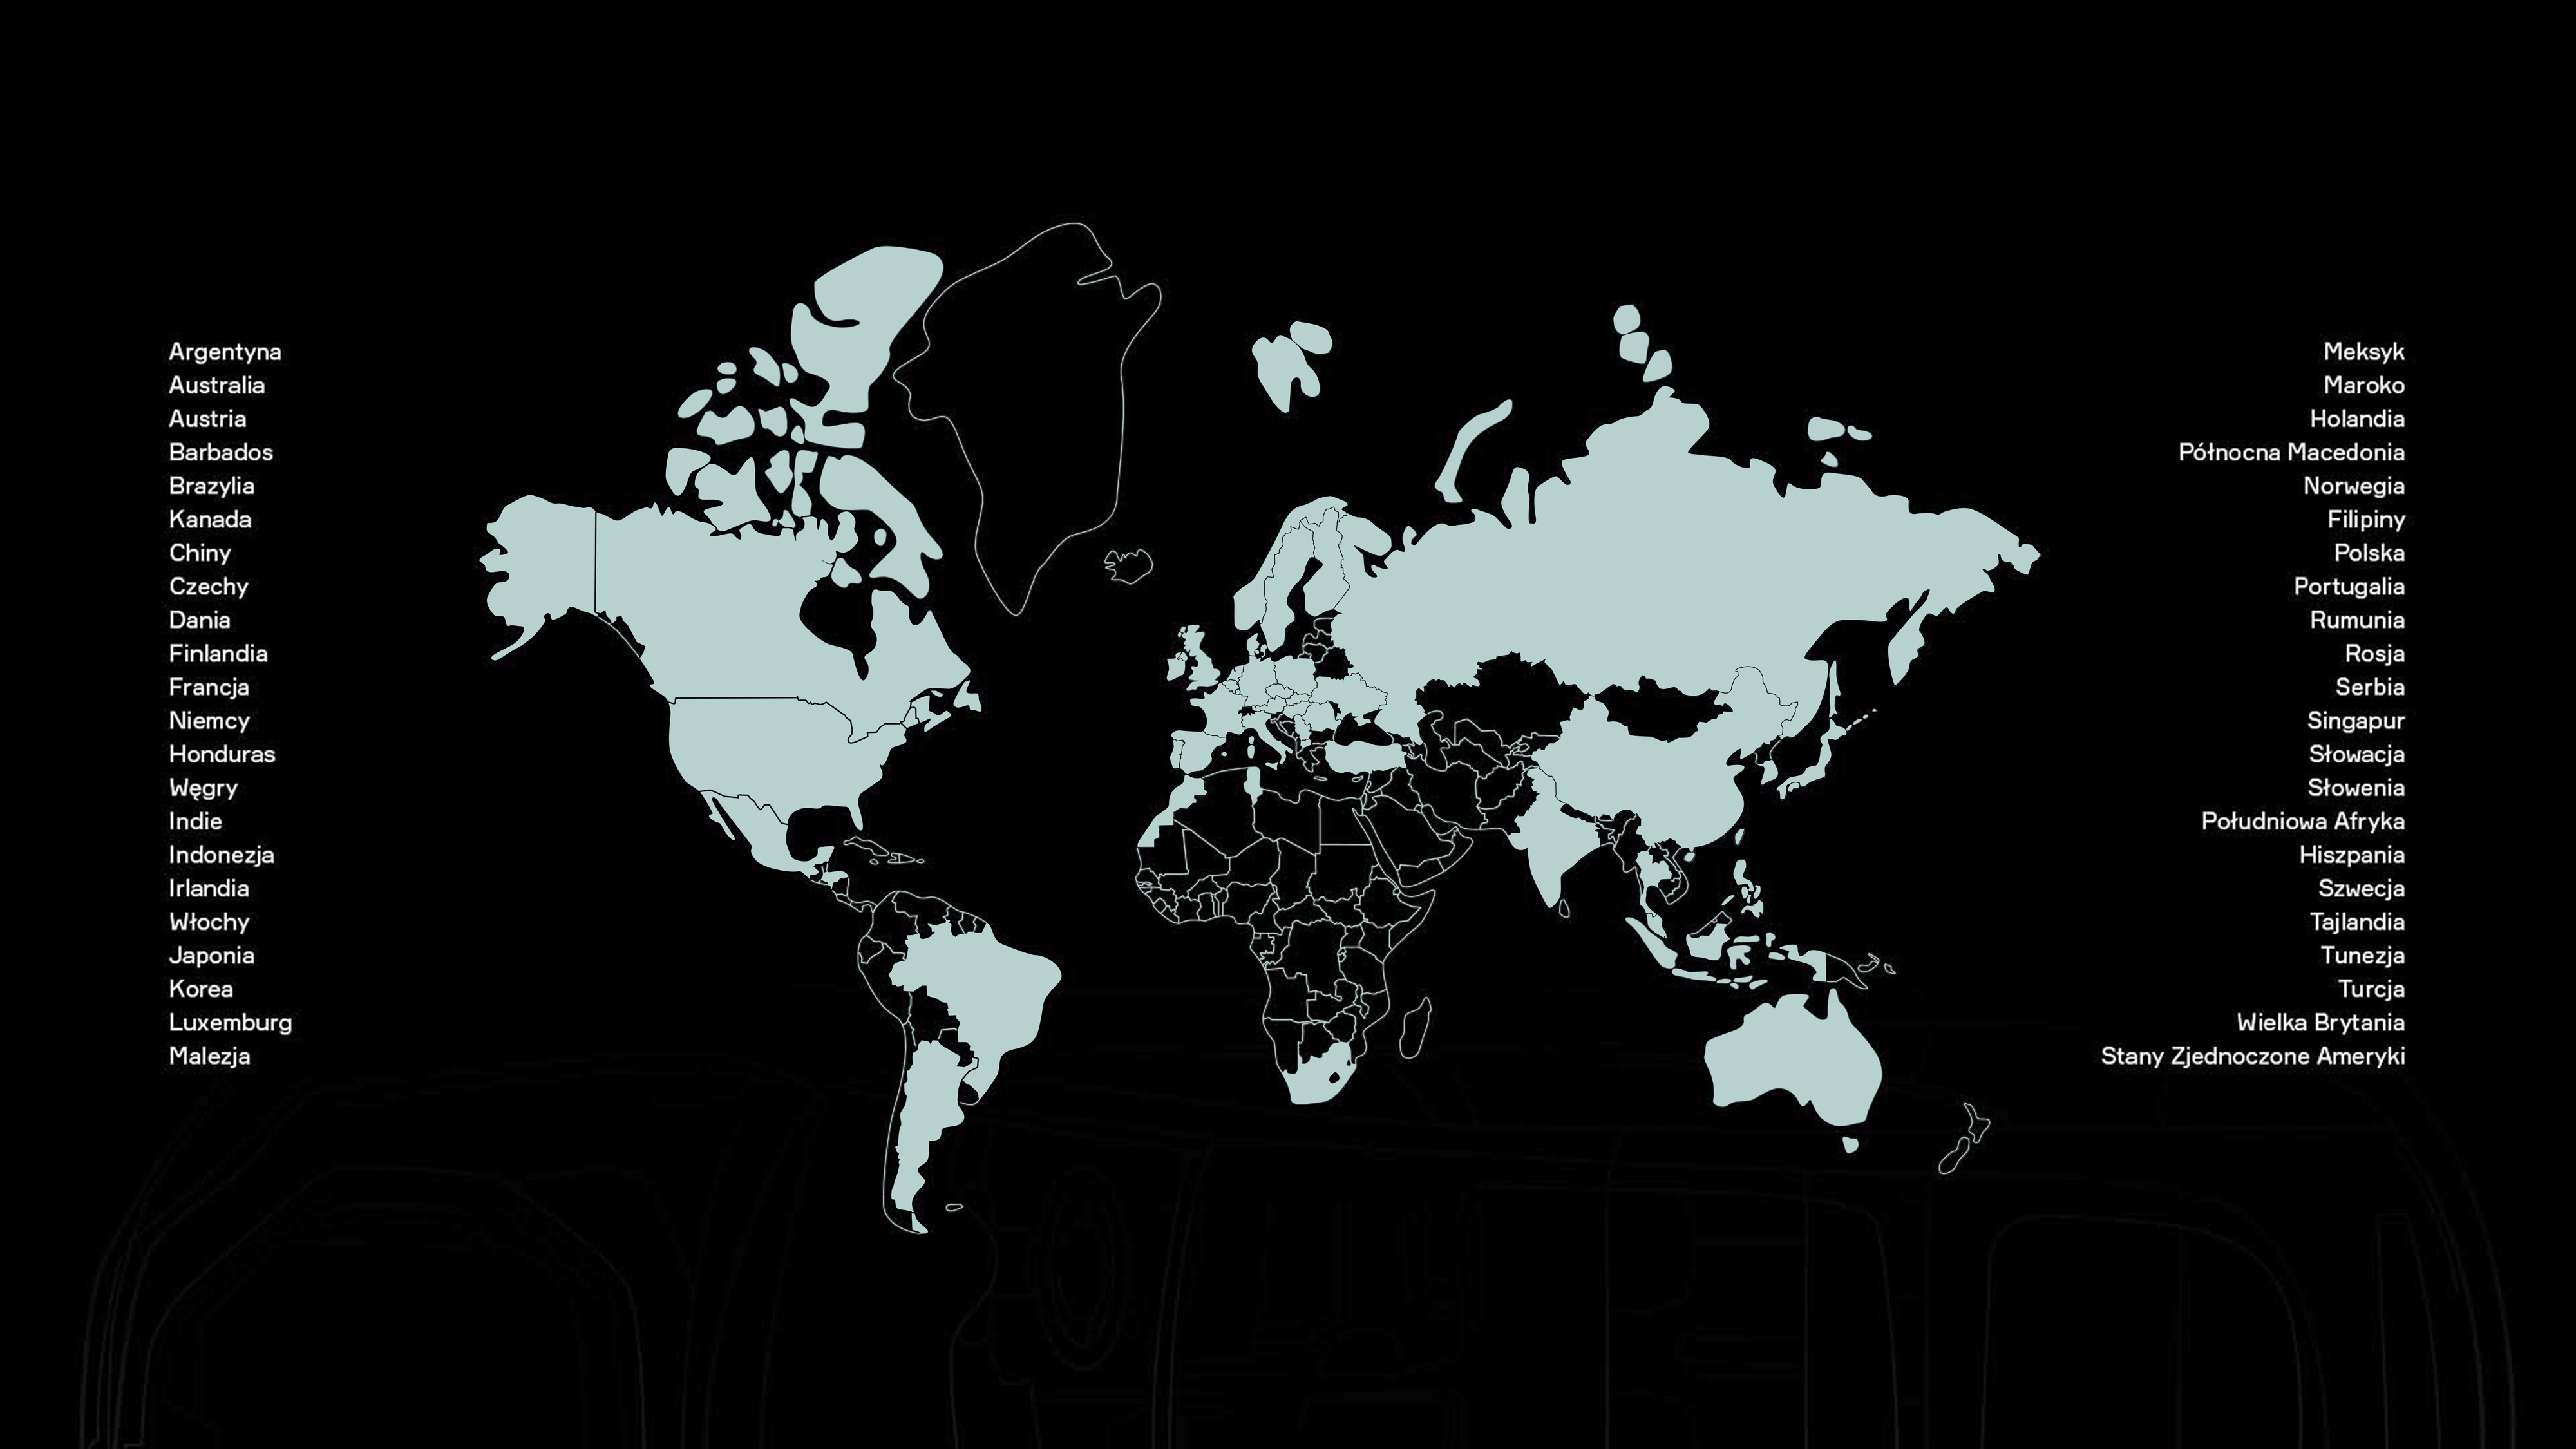 Blue map on a black background with countries listed on the side